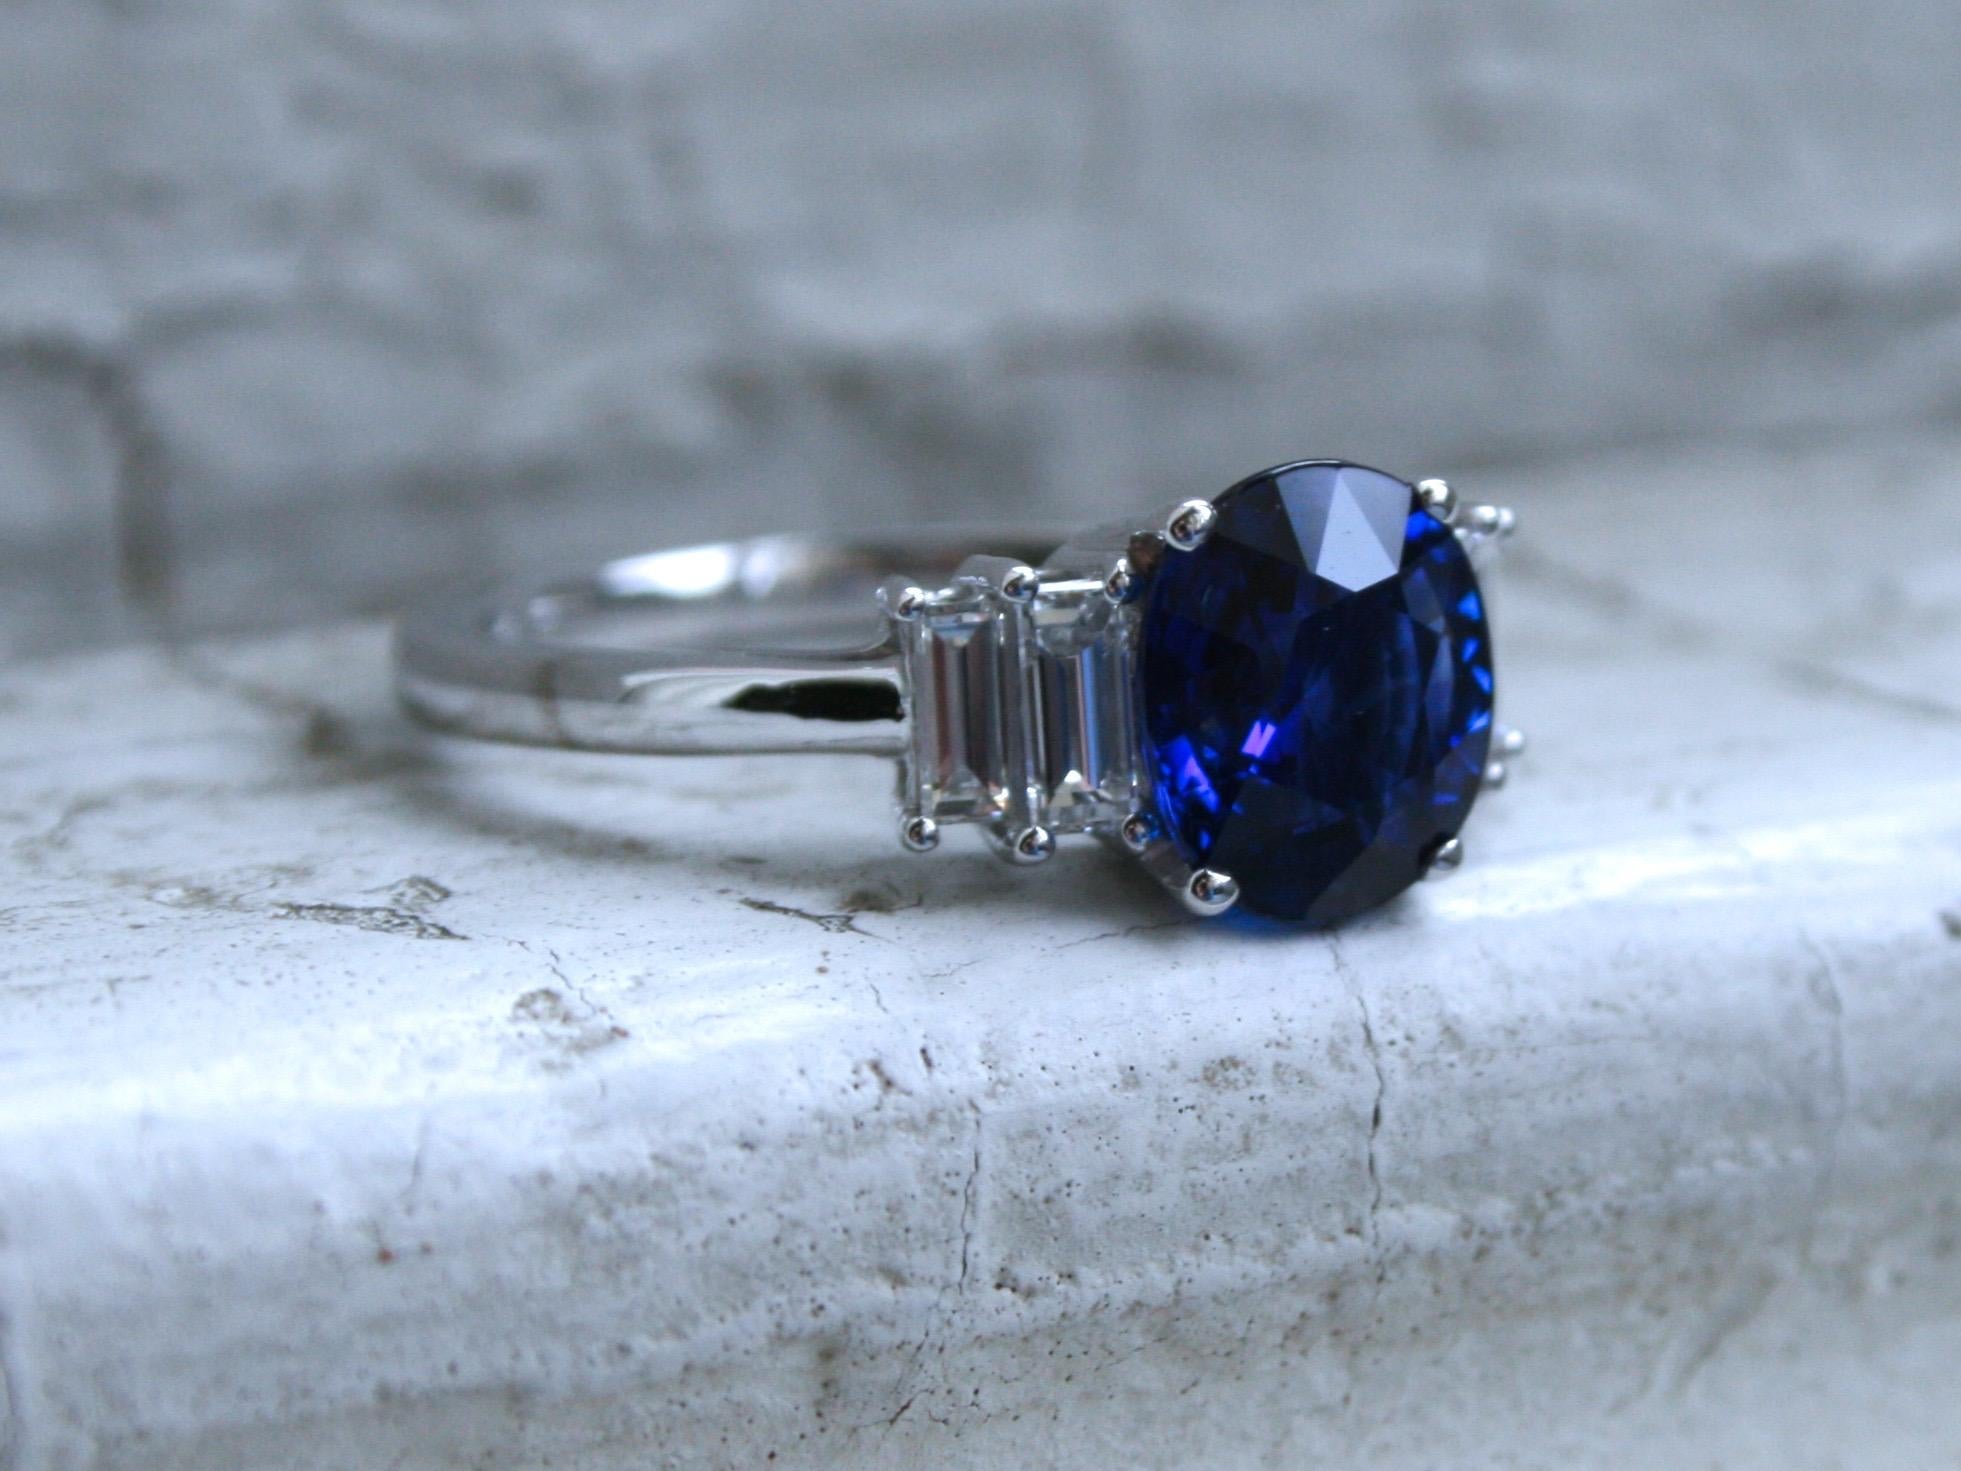 This Beautiful Diamond and Sapphire Ring is a stunning, unique design! Crafted in 14K White Gold, the design features a classic five stone layout, with an Oval Sapphire center, and unique Baguette Cut Diamonds set North South on the side. So